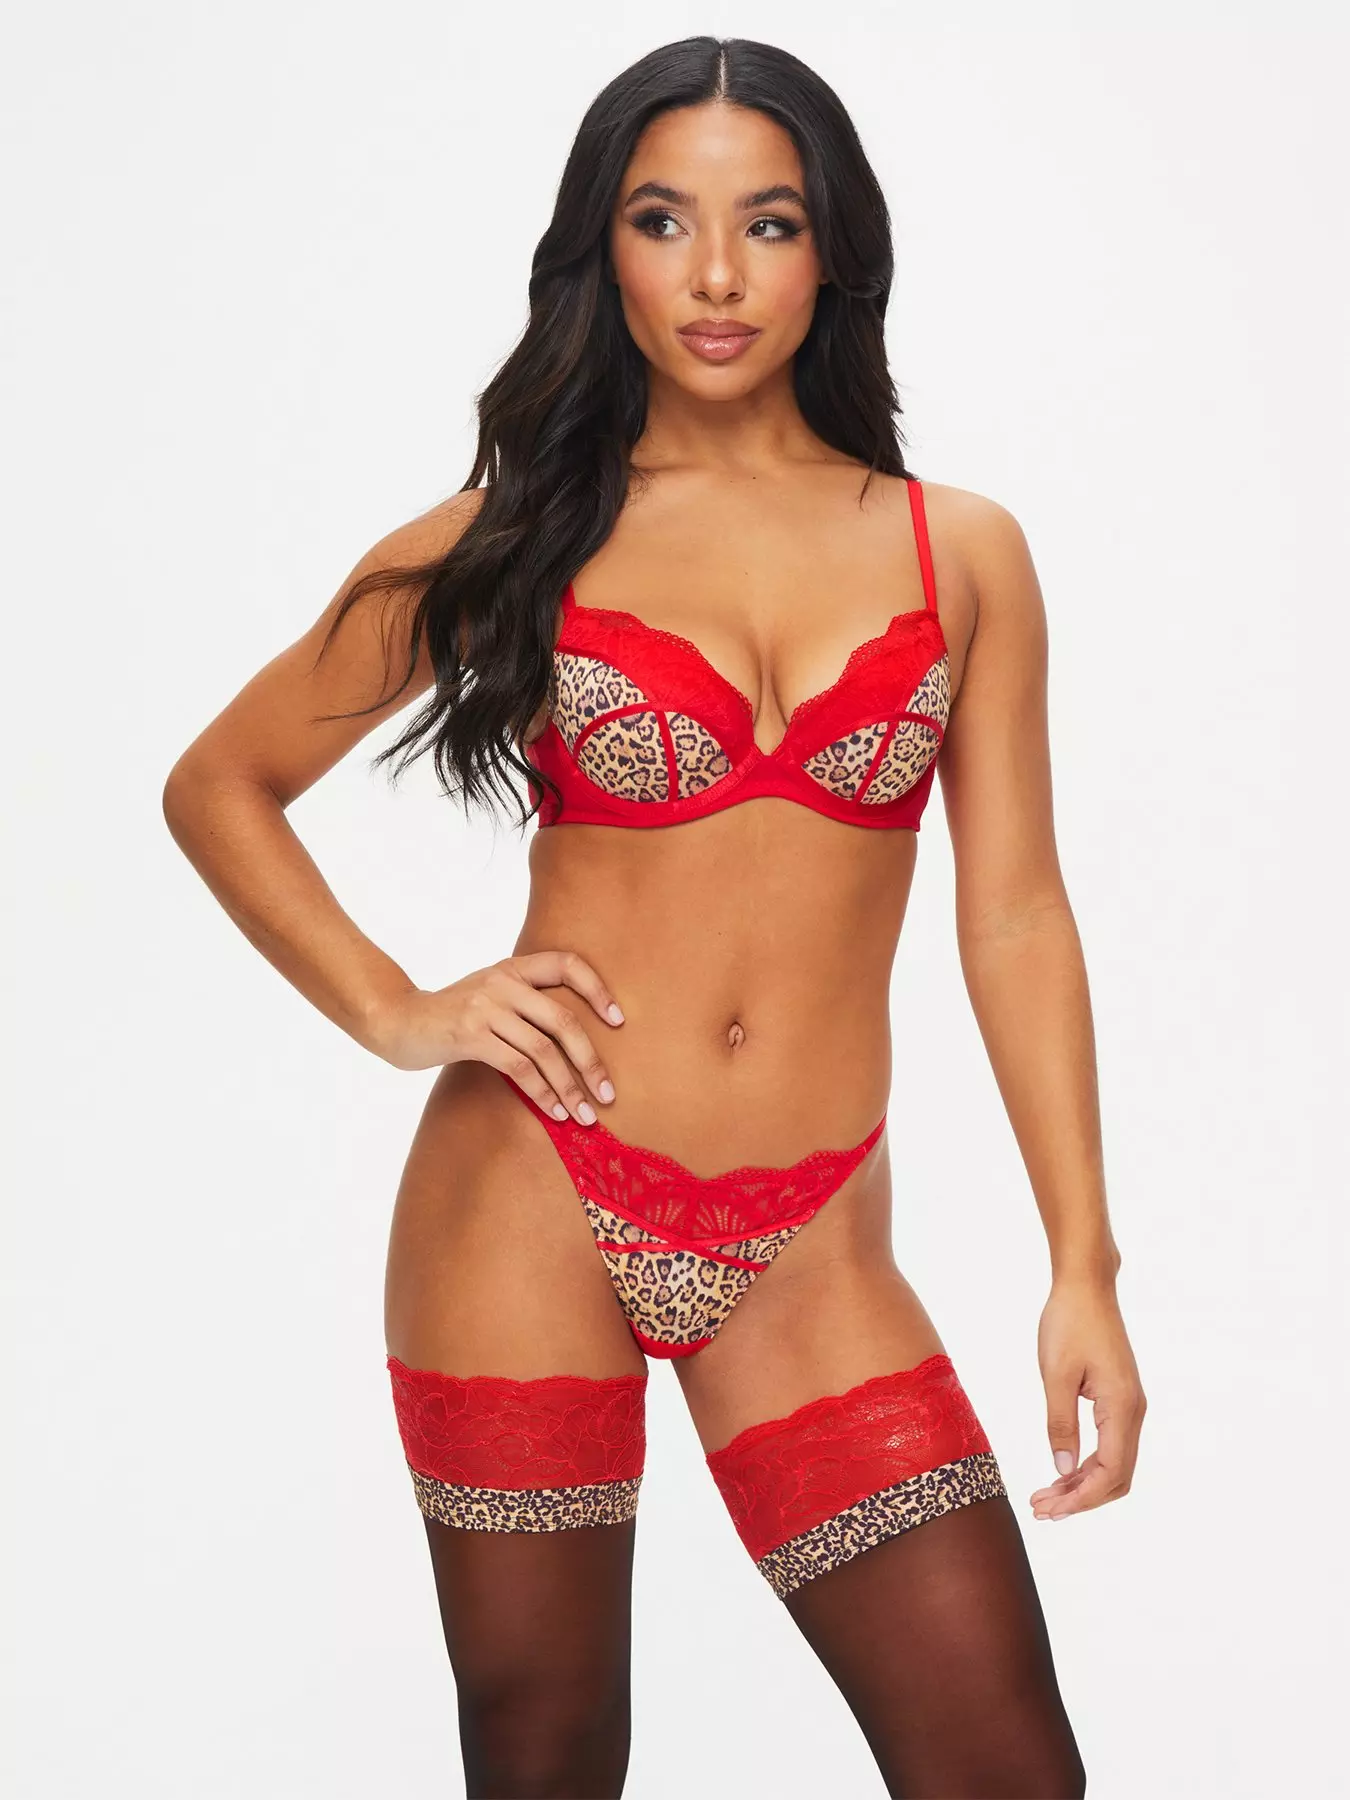 Ann Summers Challenger lace triangle bralette and cut-out thong set in red